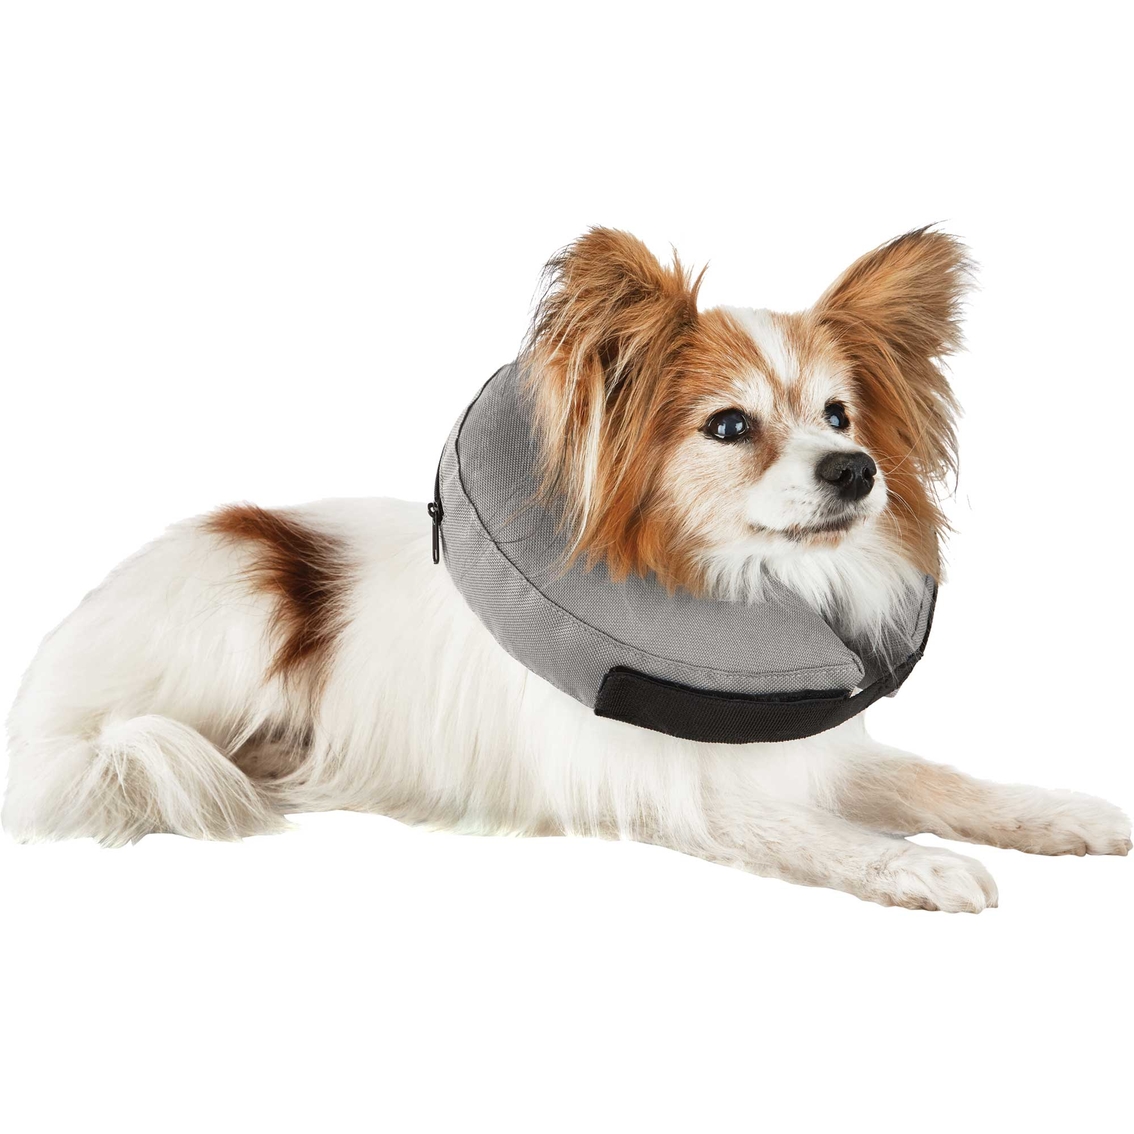 Well & Good Inflatable Collar for Pets - Image 6 of 10